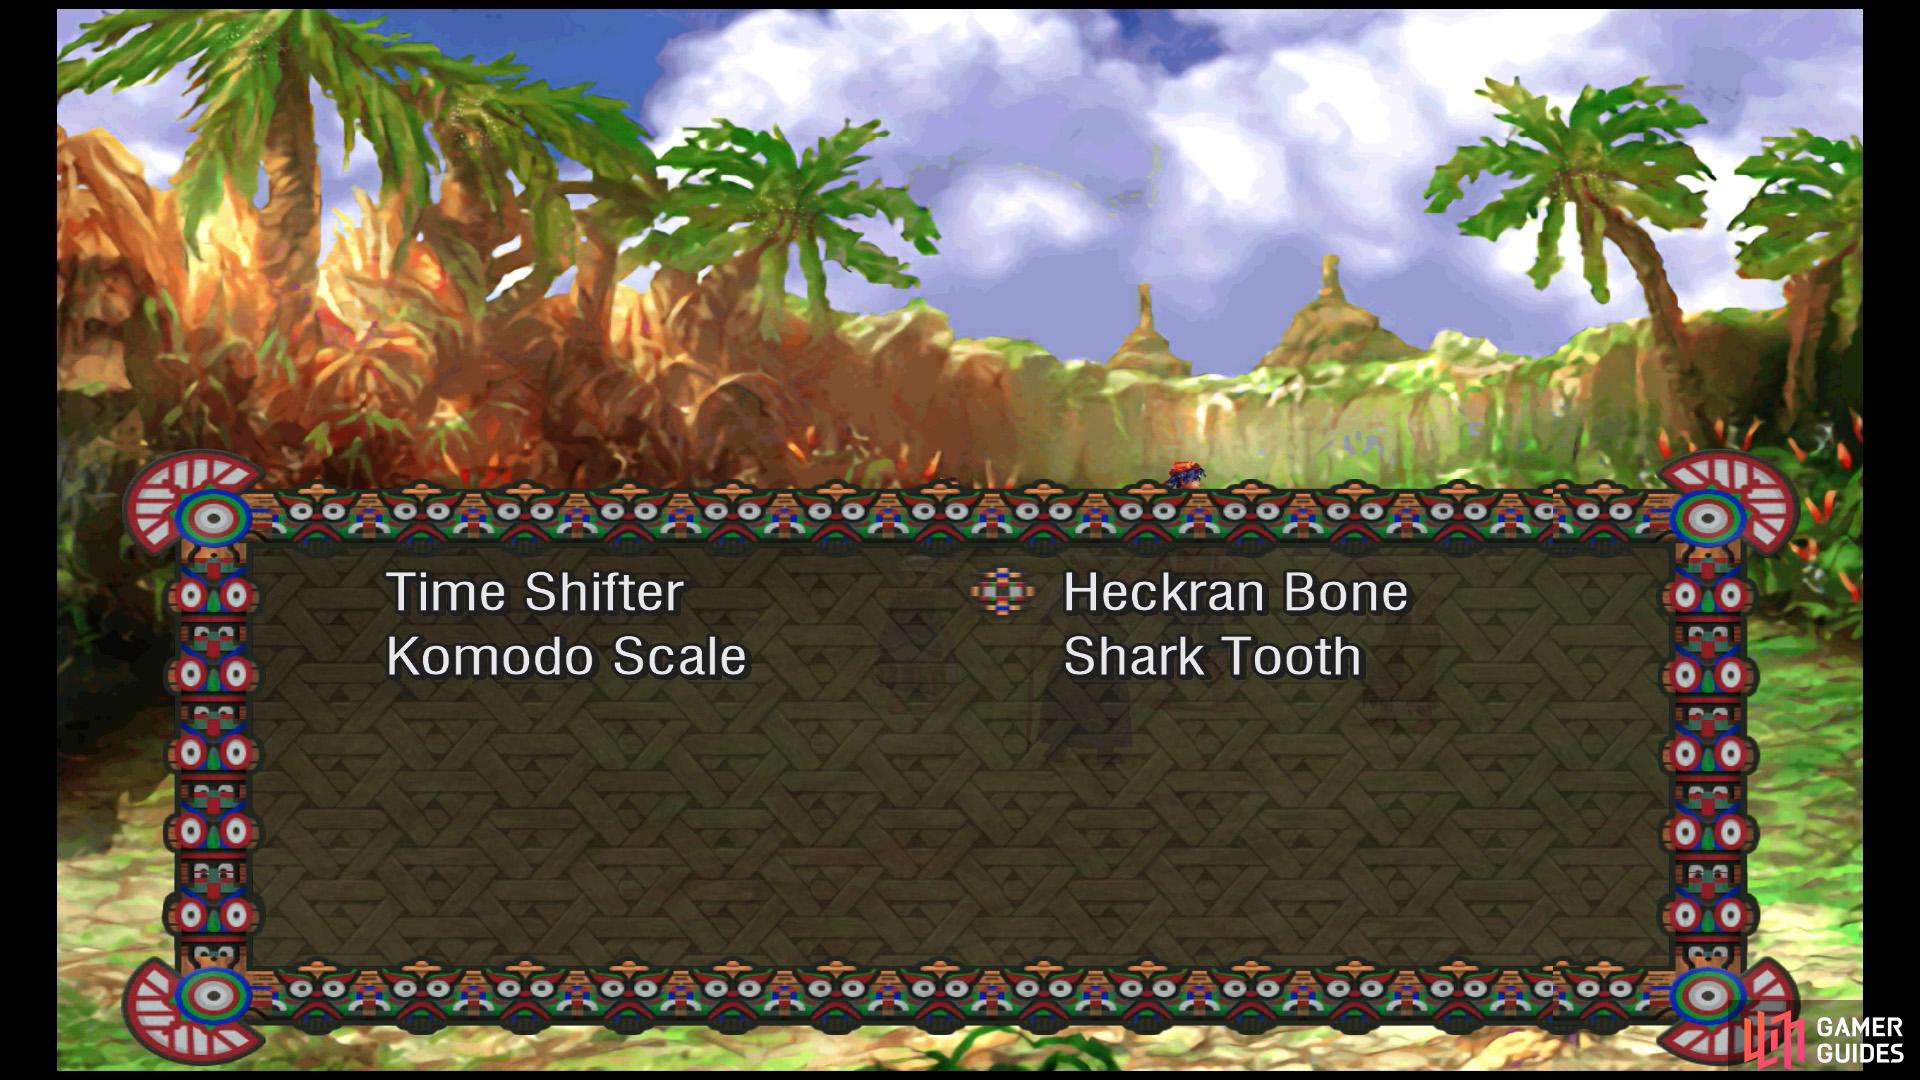 Get close to Poshul, then bring up the Key Items menu and select the Heckran Bone.